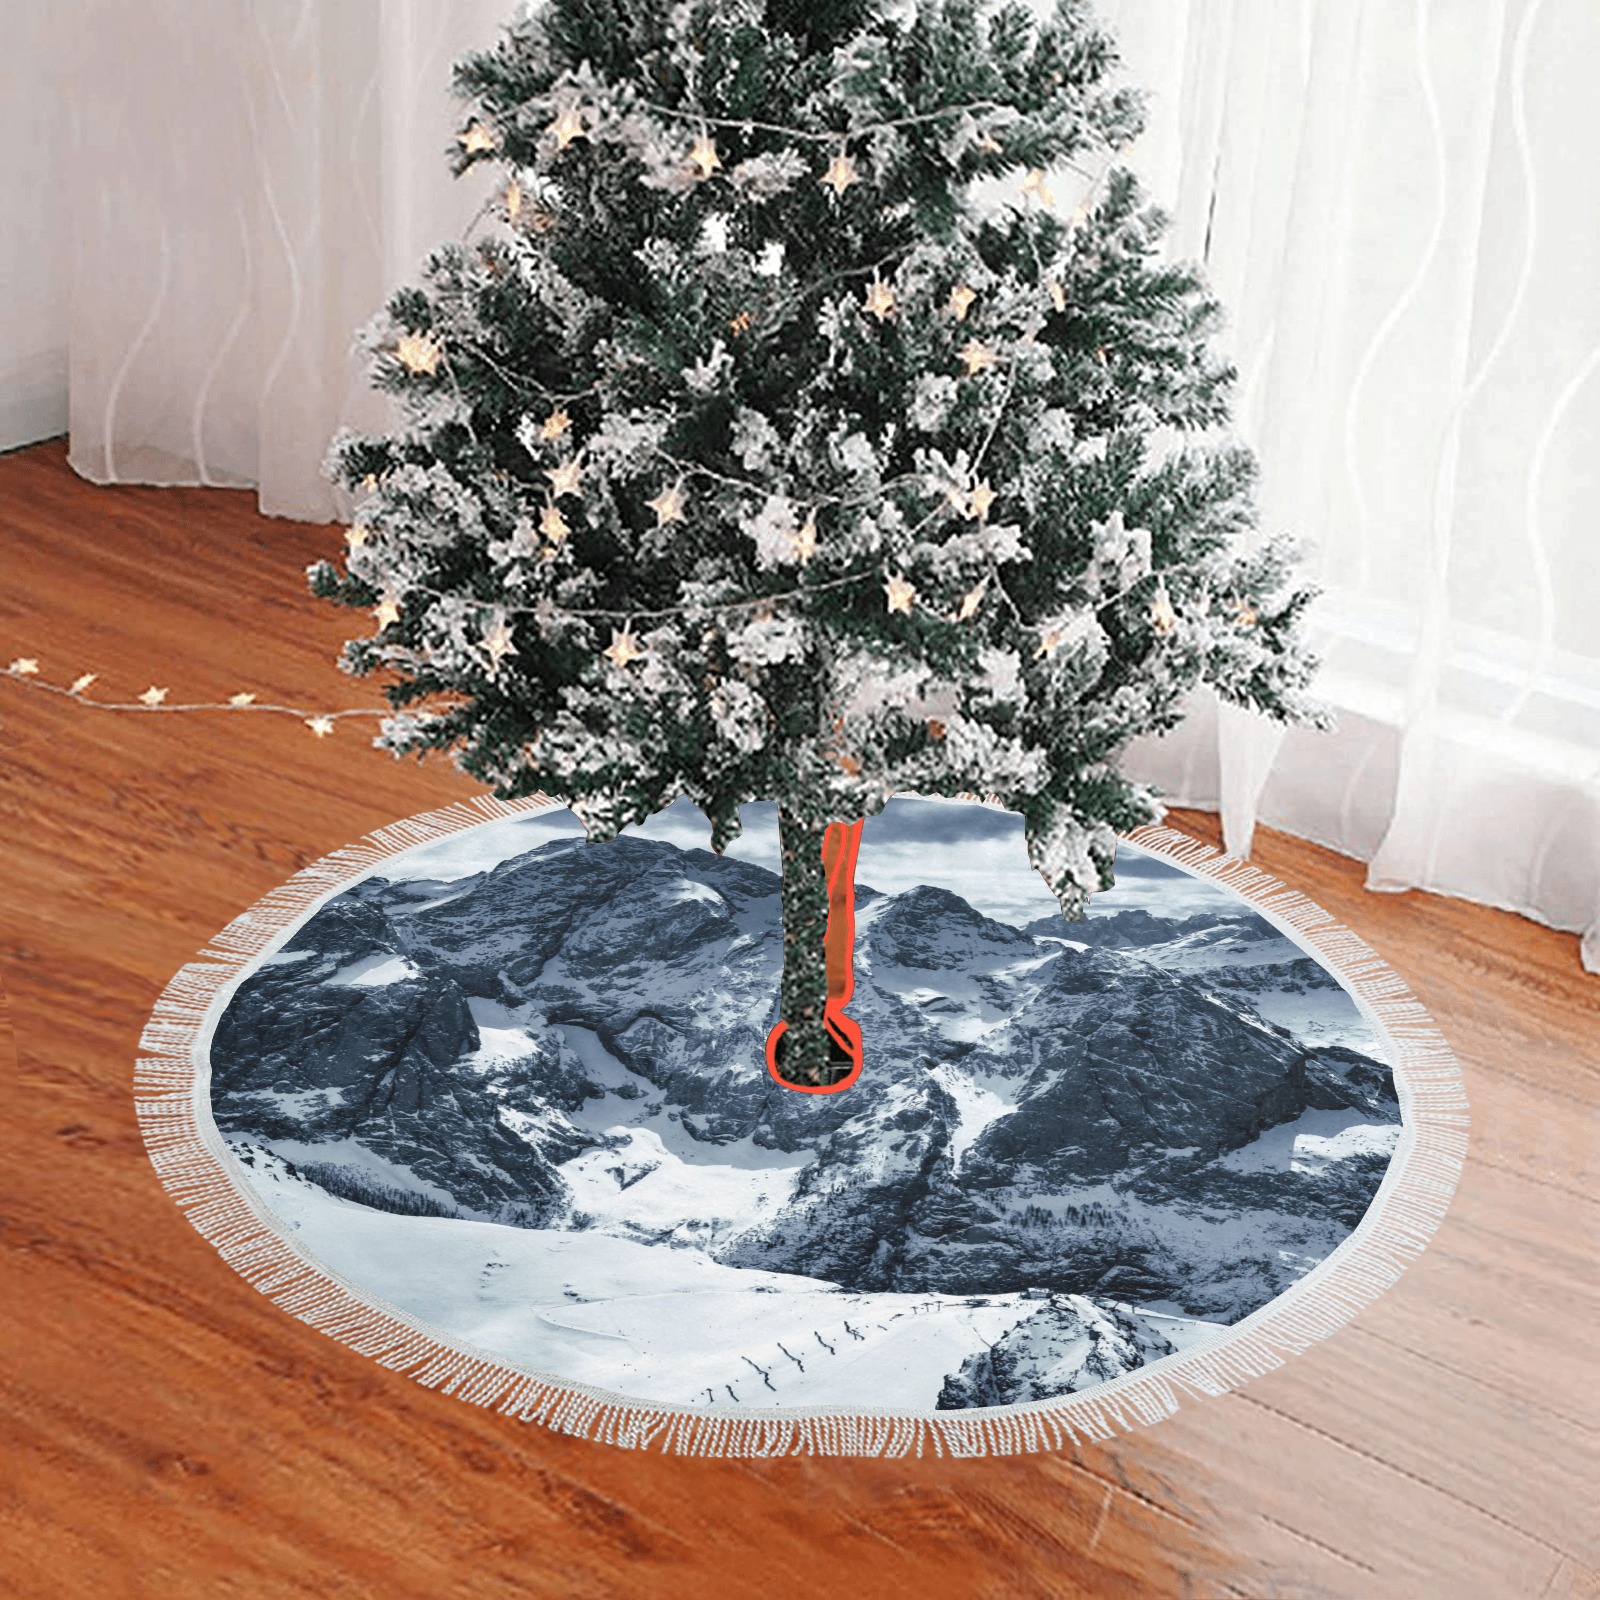 Mountains-field-snow-086 Thick Fringe Christmas Tree Skirt 36"x36"